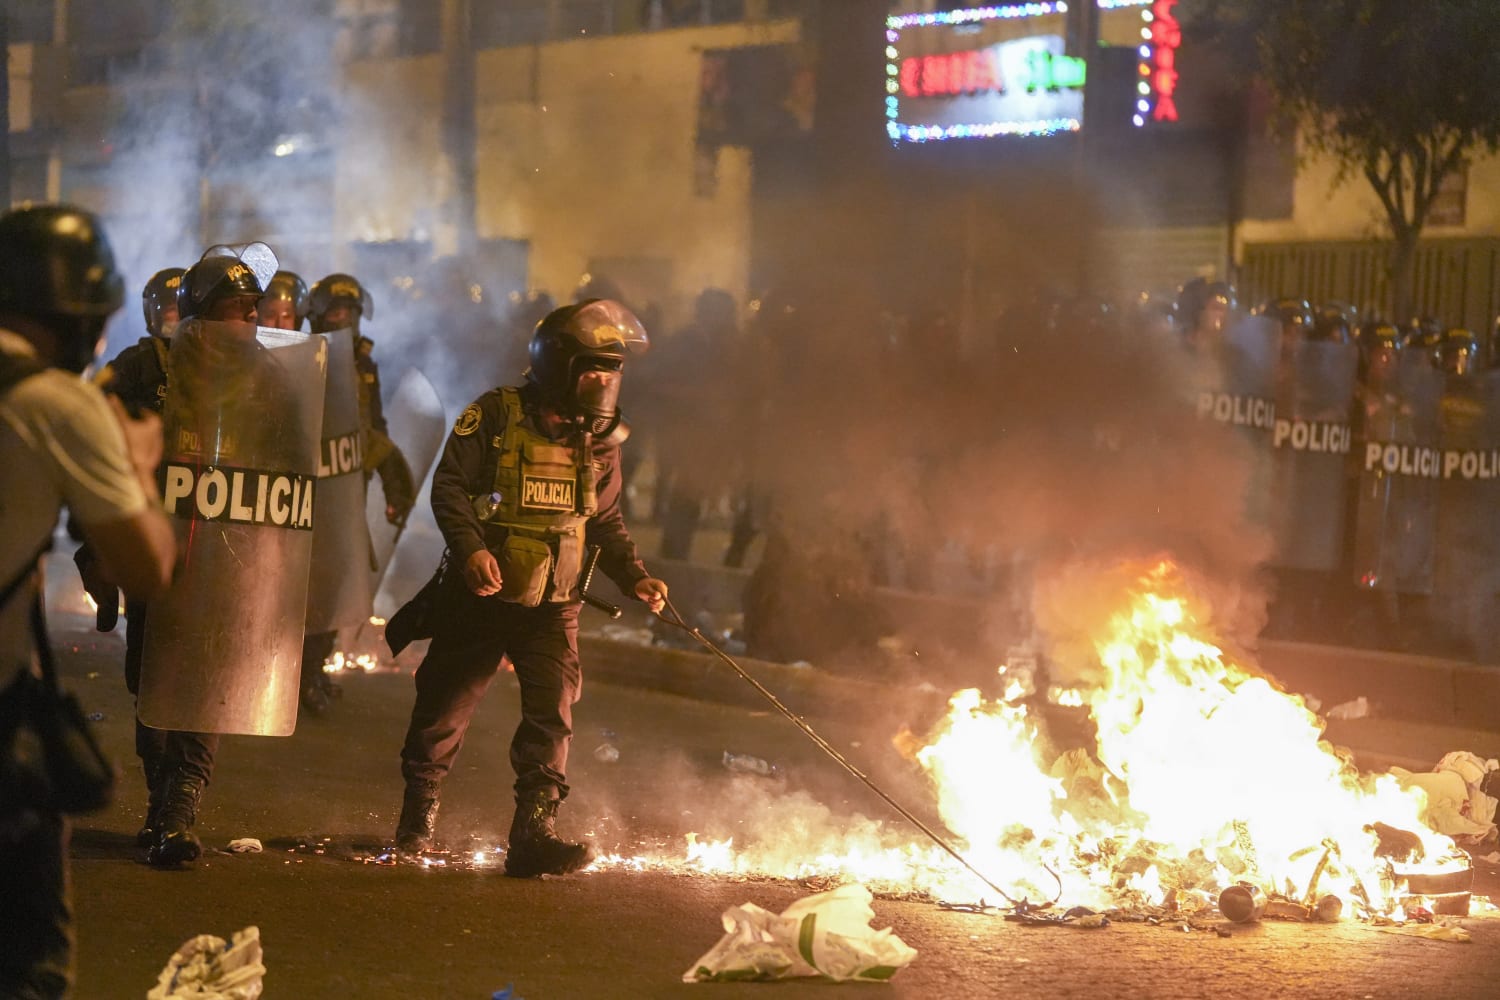 Over 50 injured as protests cause ‘nationwide chaos’ in Peru